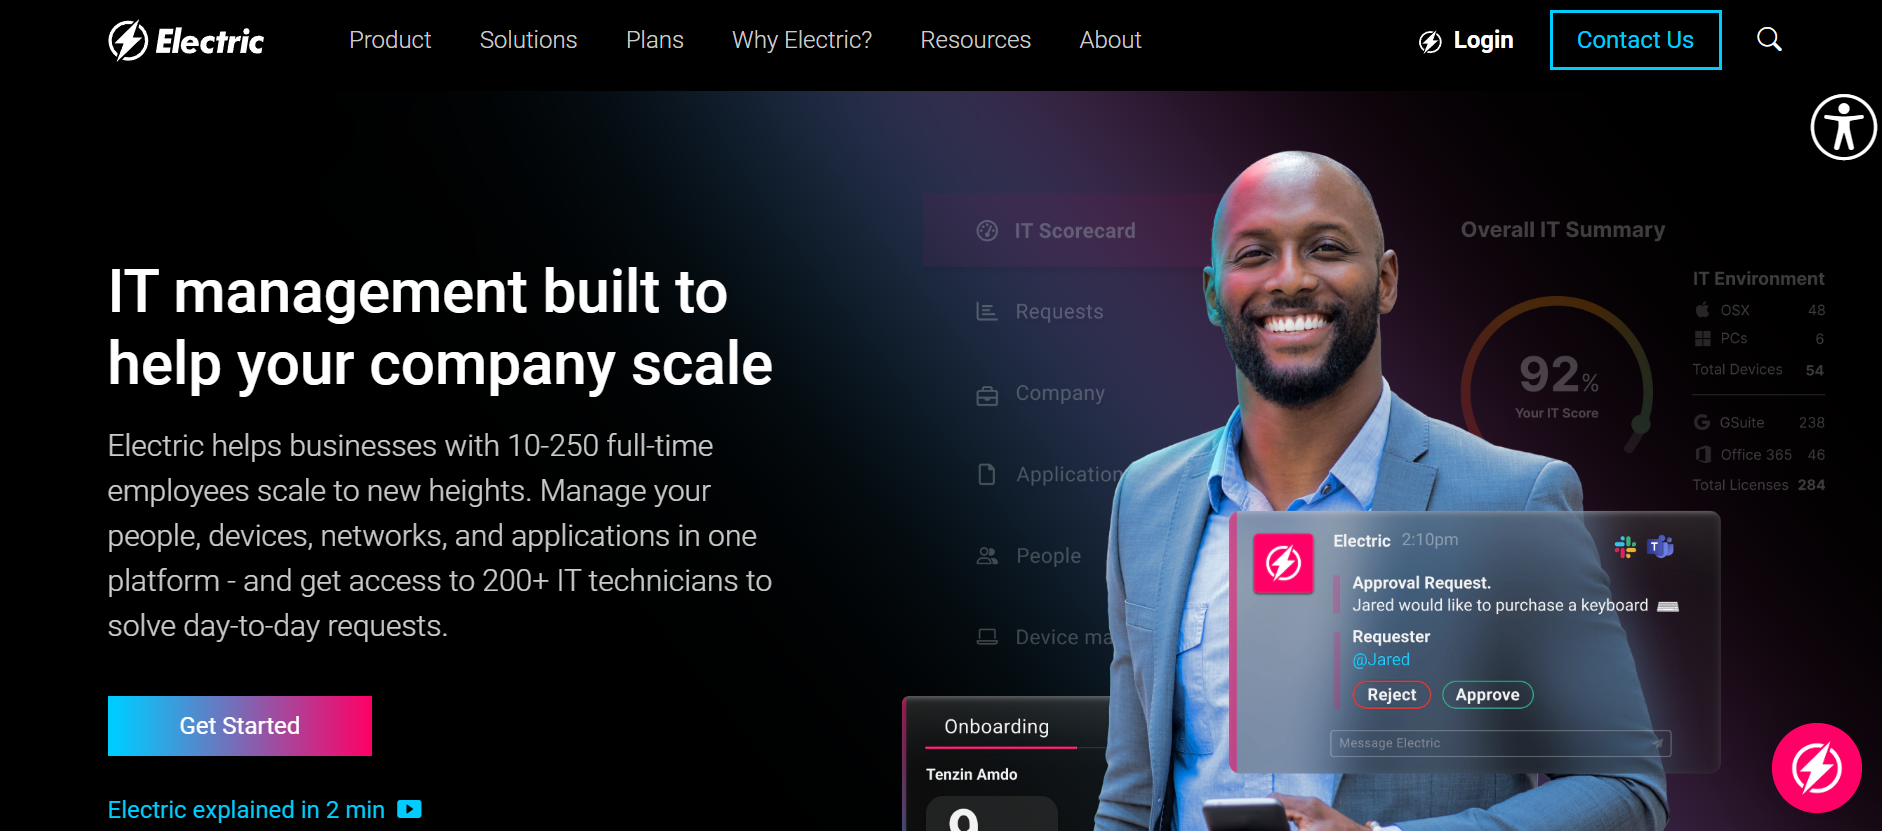 Electric IT homepage: IT management built to help your company scale. 